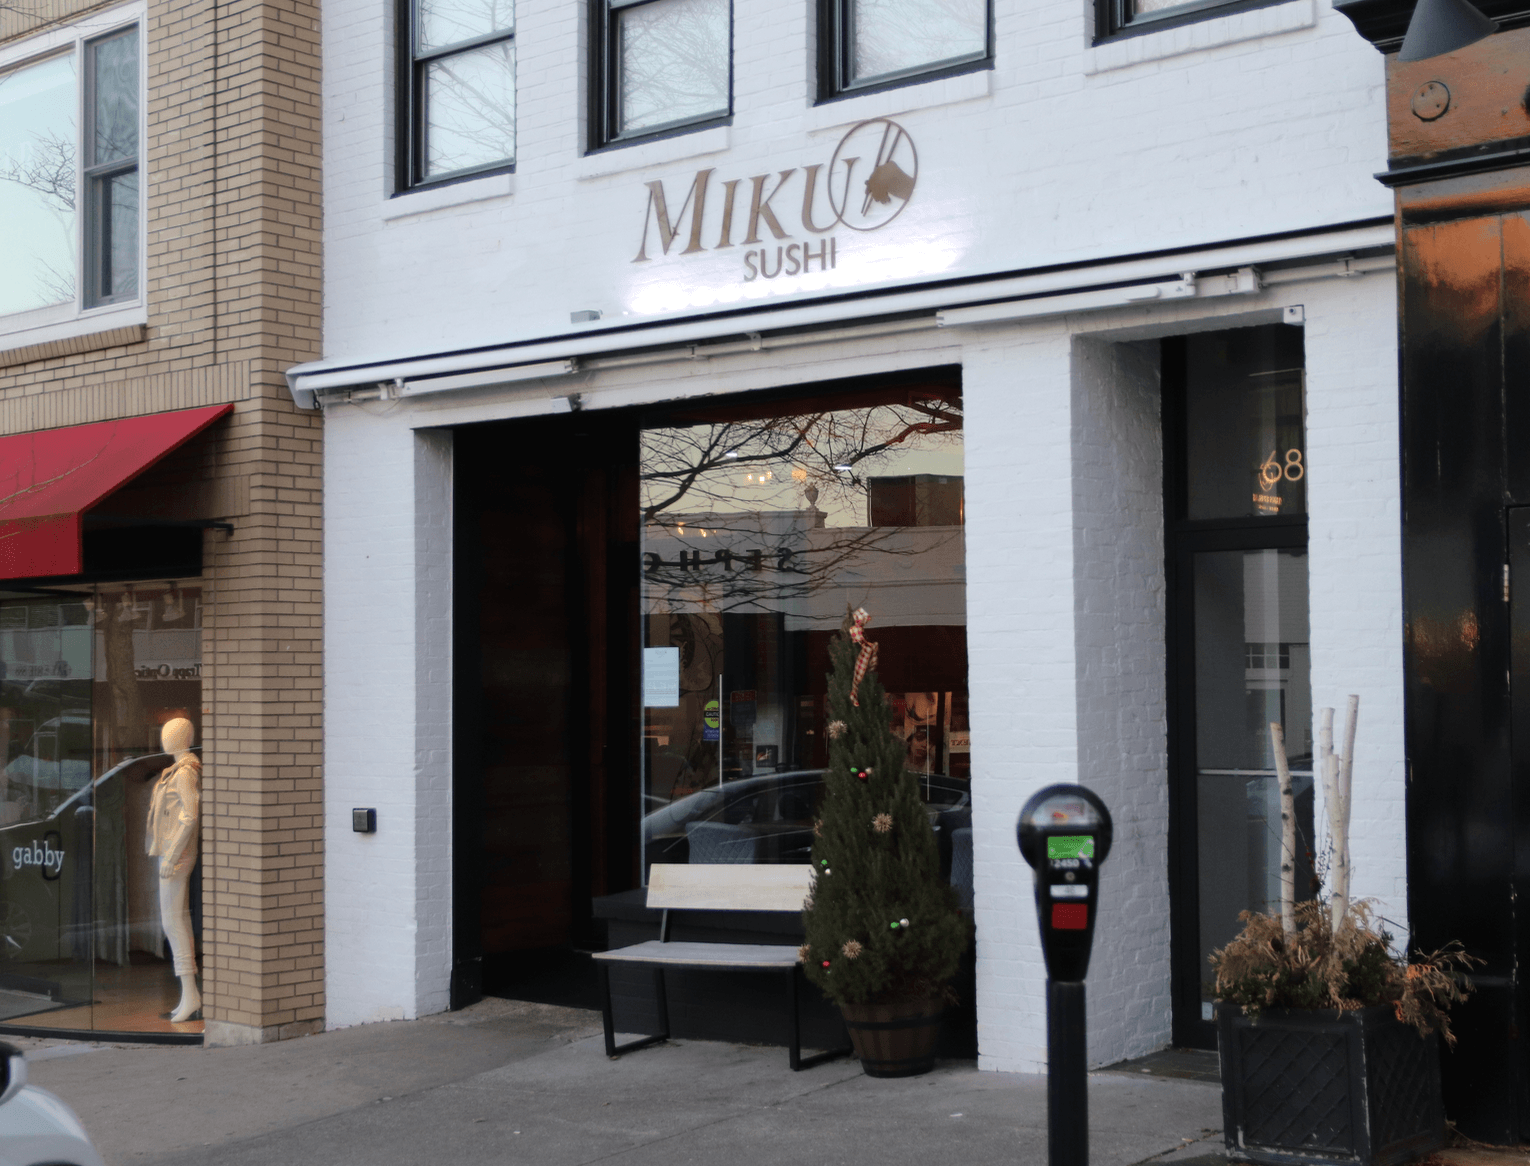 Miku Sushi announced the restaurant is switching to a takeout and delivery service as of March 13, 2020. Photo: Leslie Yager